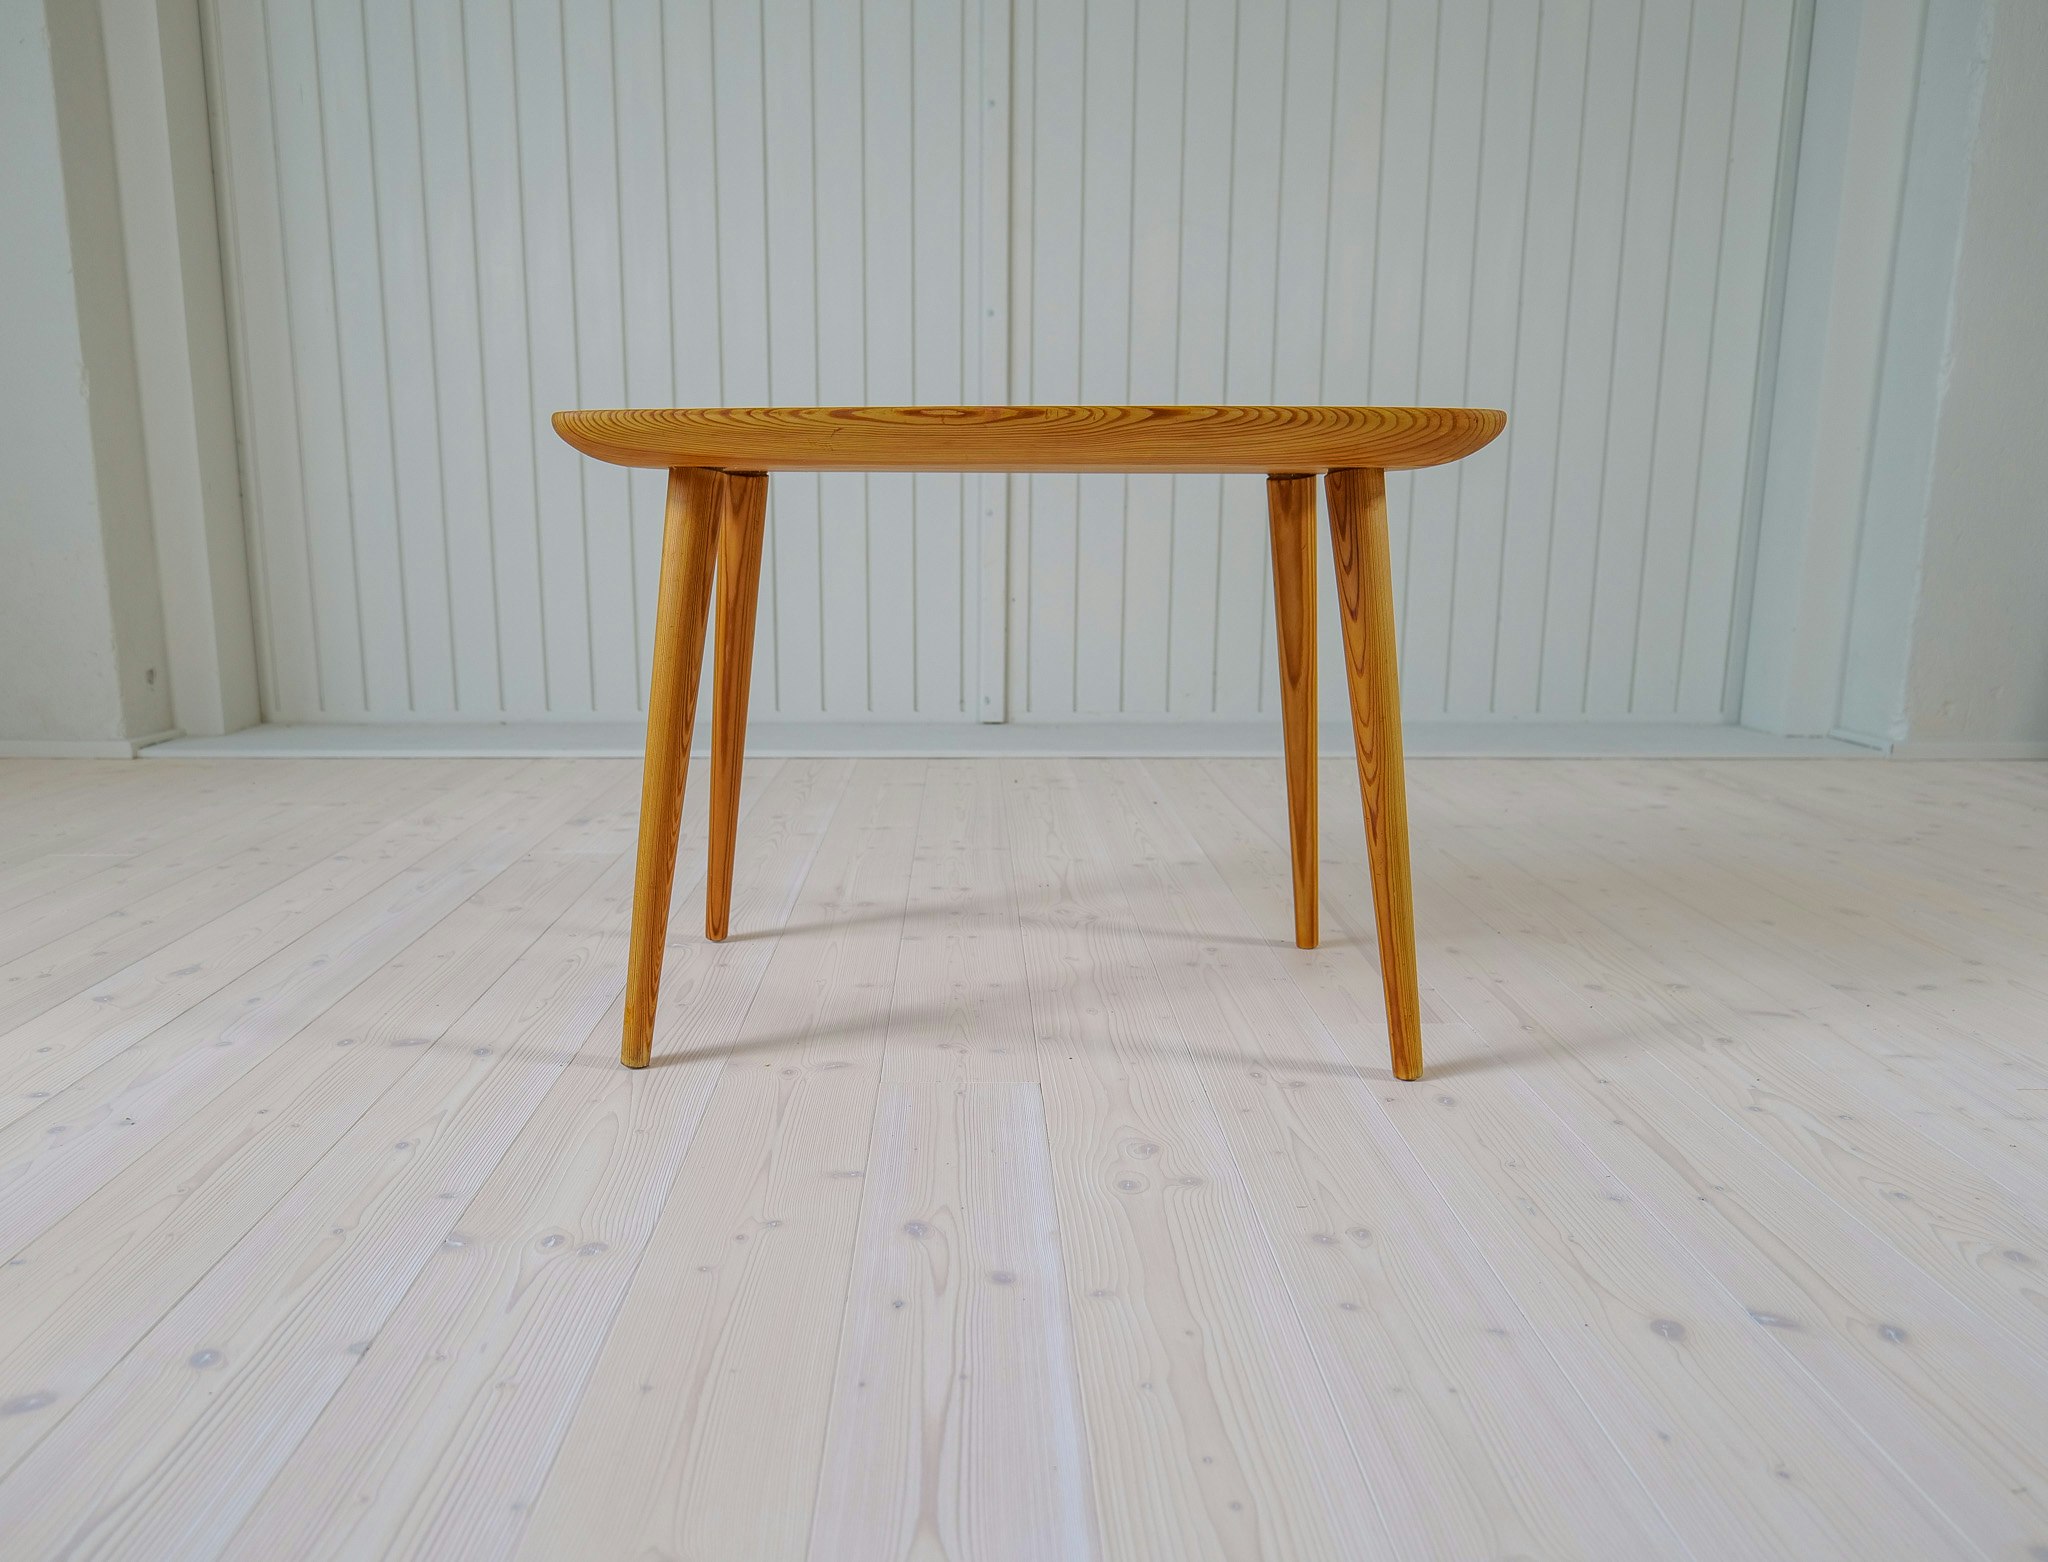 Midcentury Modern Coffe Table in Pine Sweden 1940s